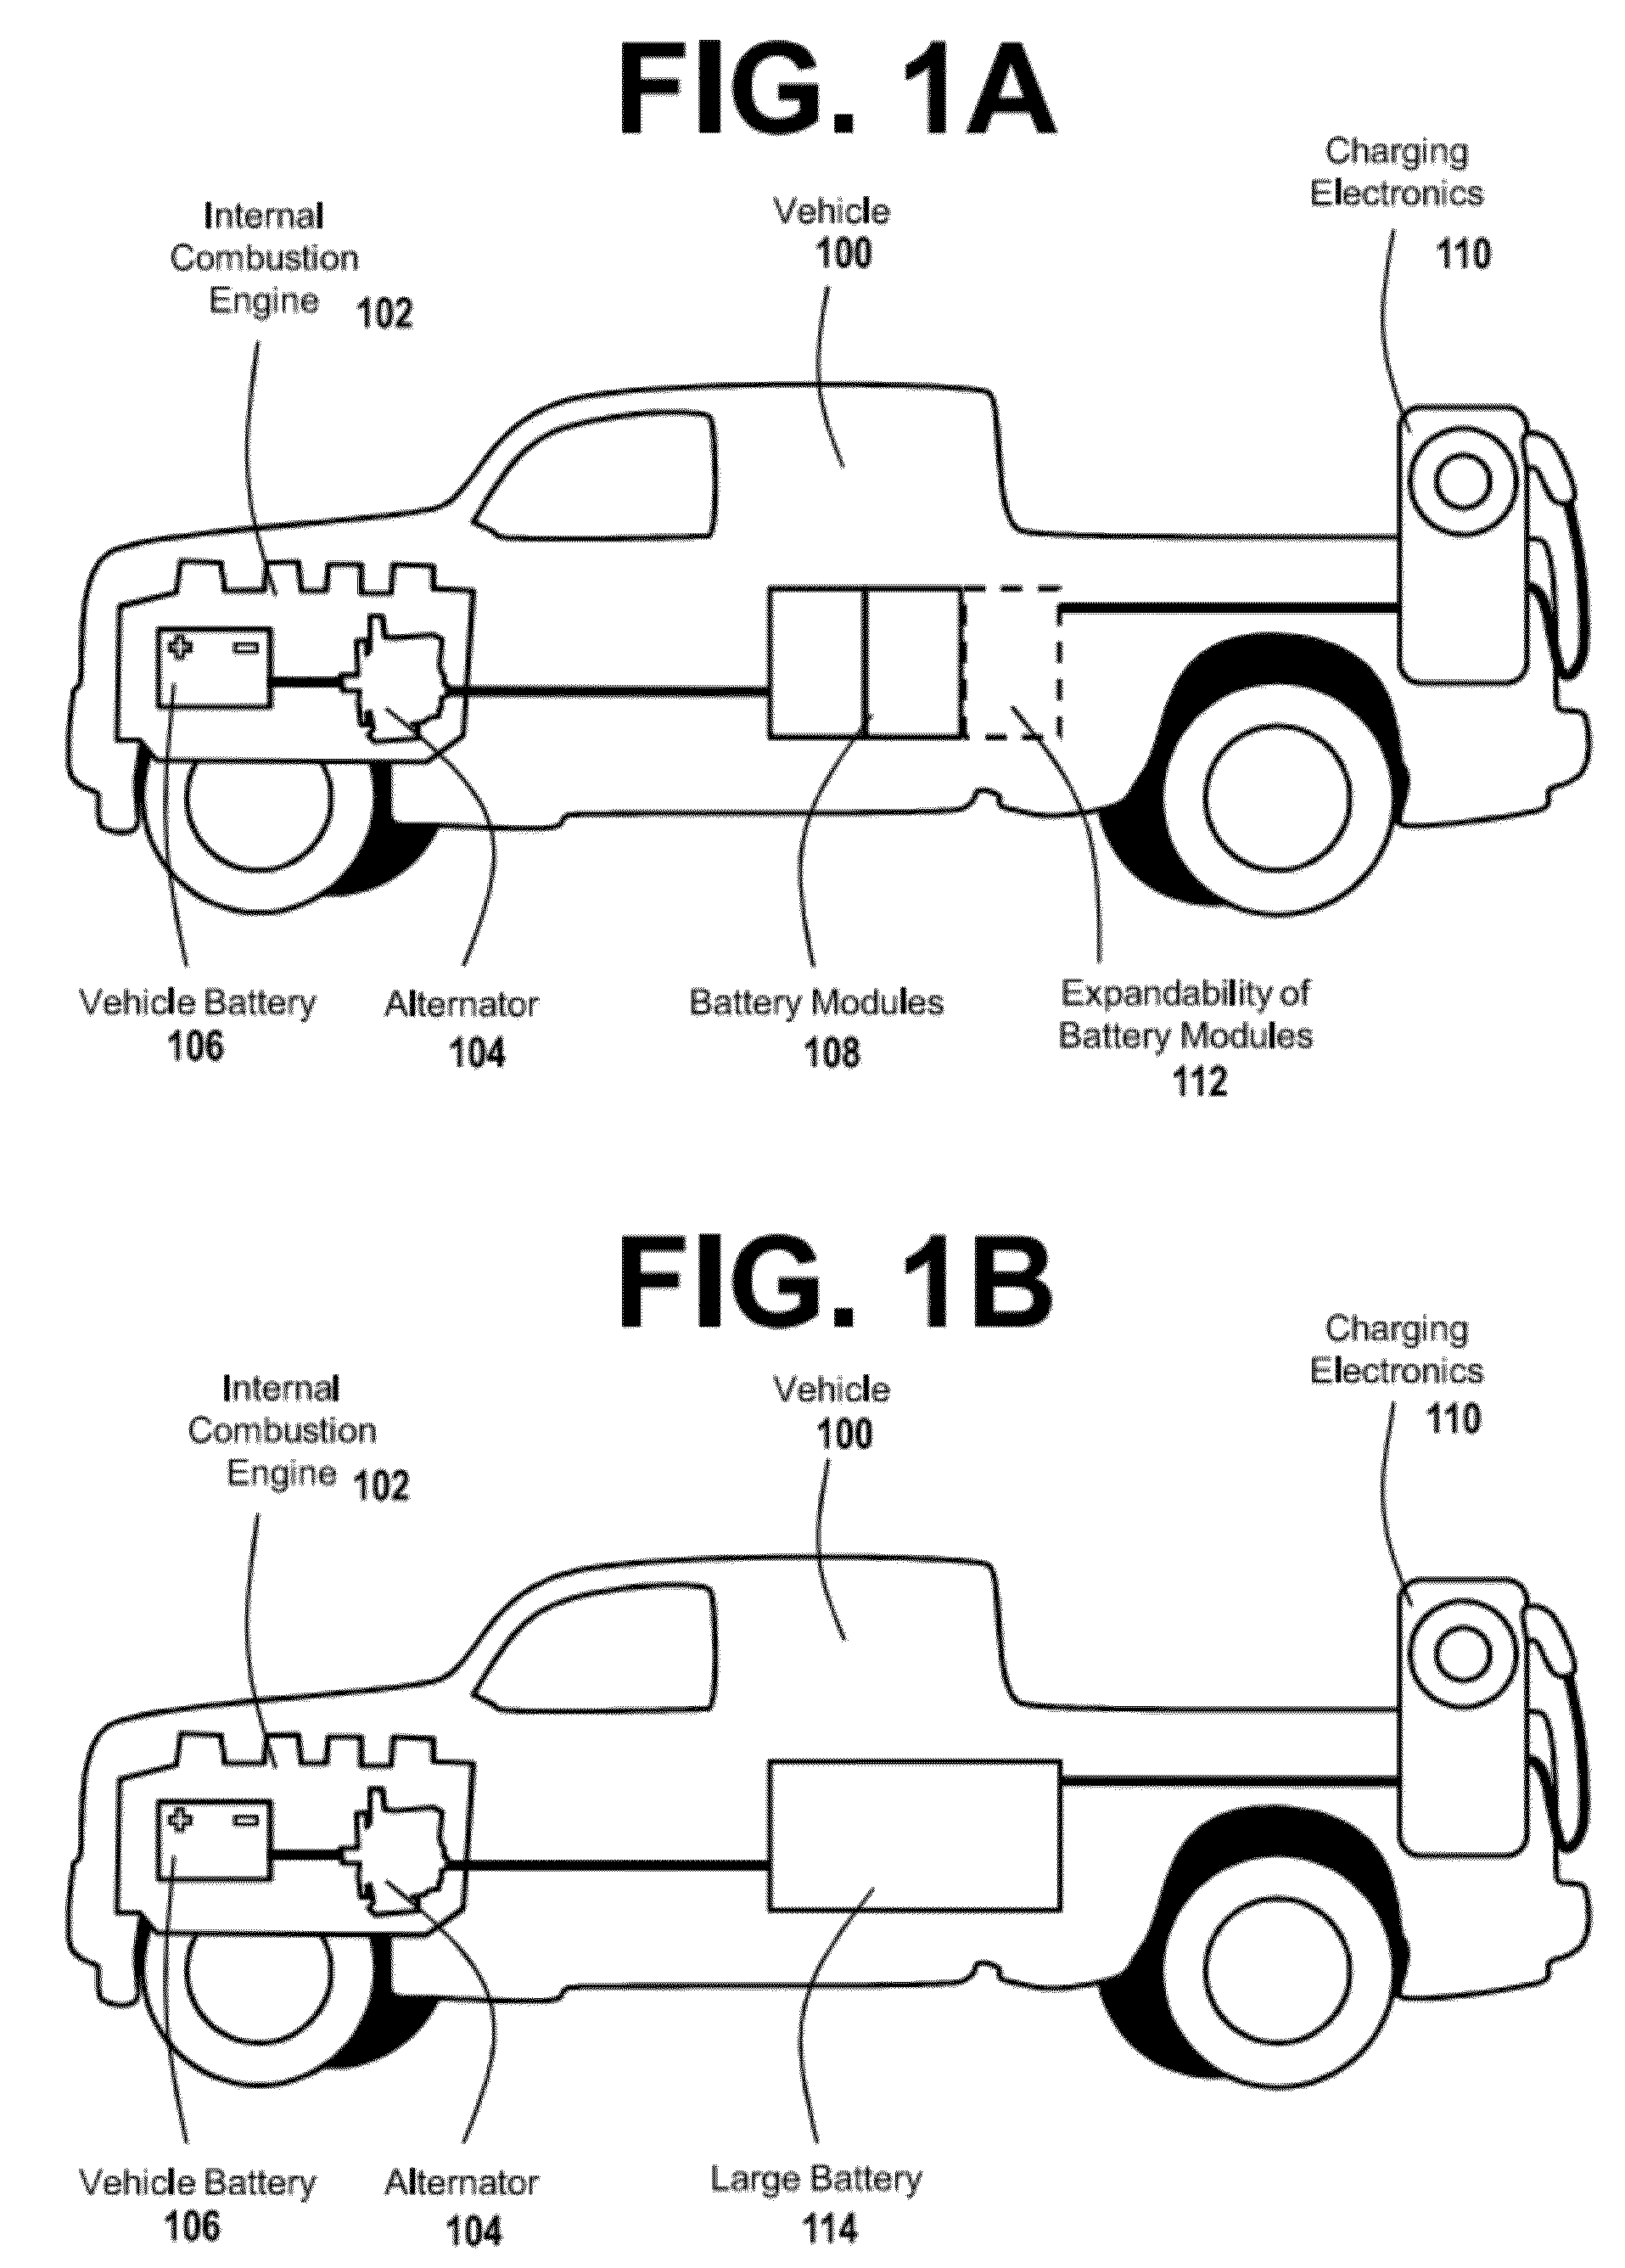 Charging Service Vehicles and Methods Using Modular Batteries